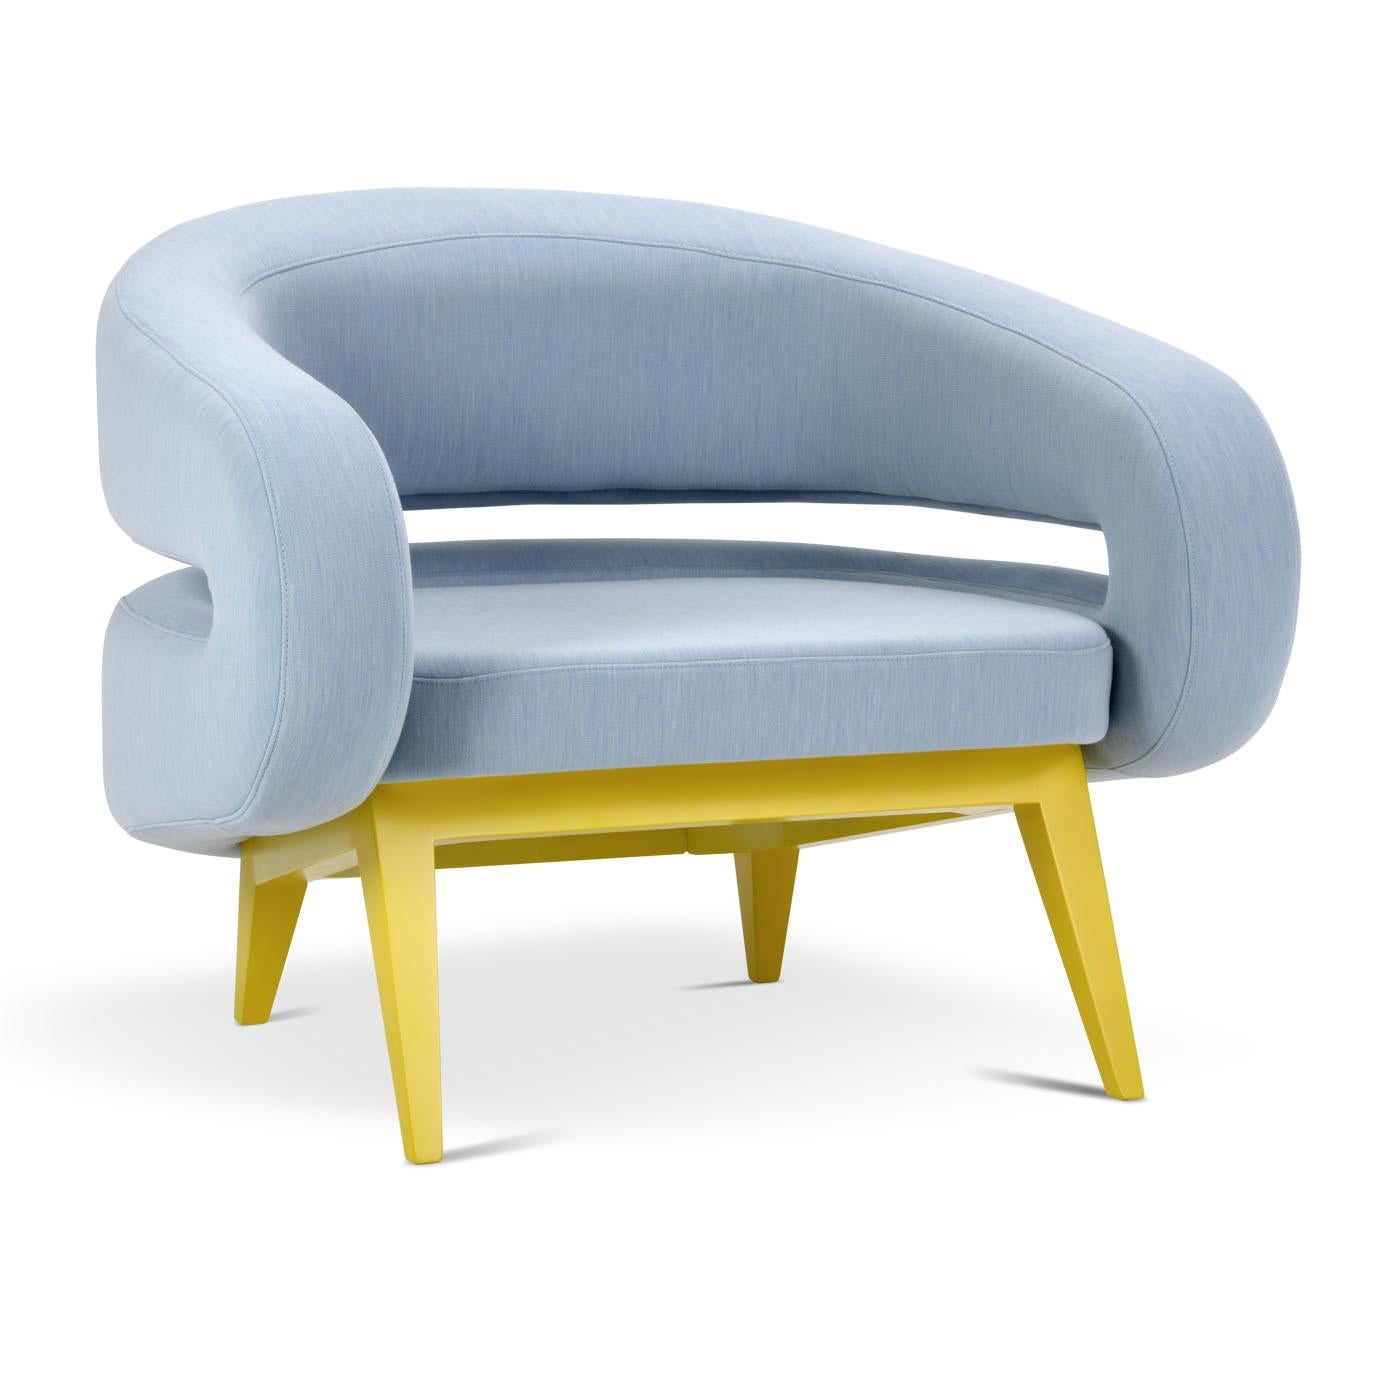 The geometric design offers a futuristic aspect and with the base made from beech wood, it is available in various colors. This armchair features a wrap-around back and the seat is padded in non-deformable polyurethane foam in various densities. The